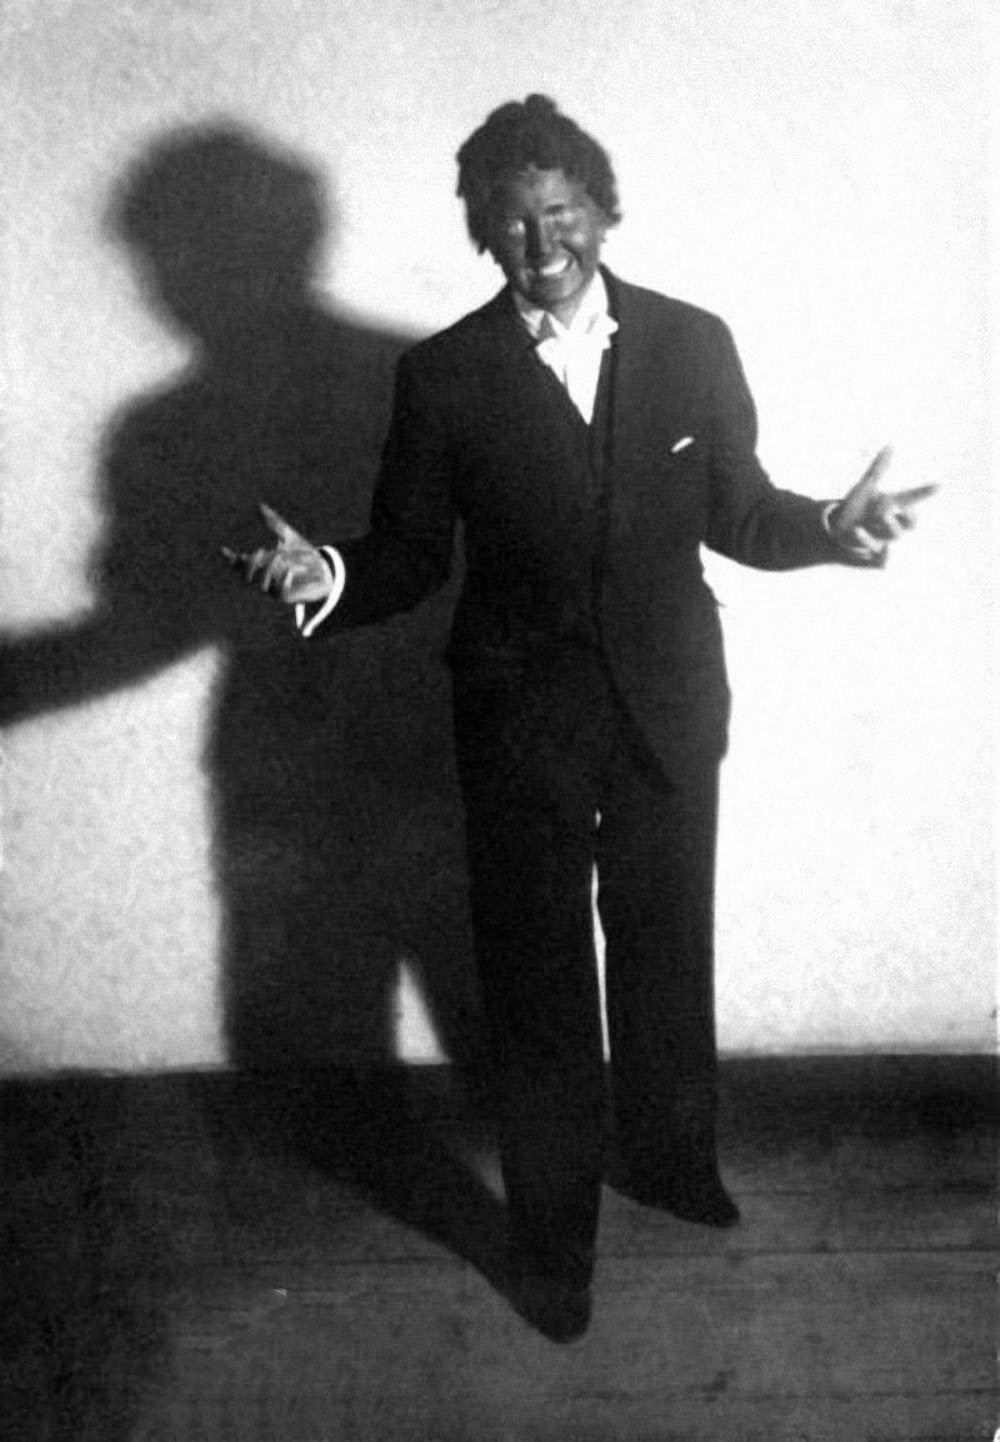 This 1937 photo of Braun was titled "Me as Al Jolson" and depicts her in blackface as the American actor and singer in his role in The Jazz Singer. Braun was a fan of American movies, including Gone with the Wind.